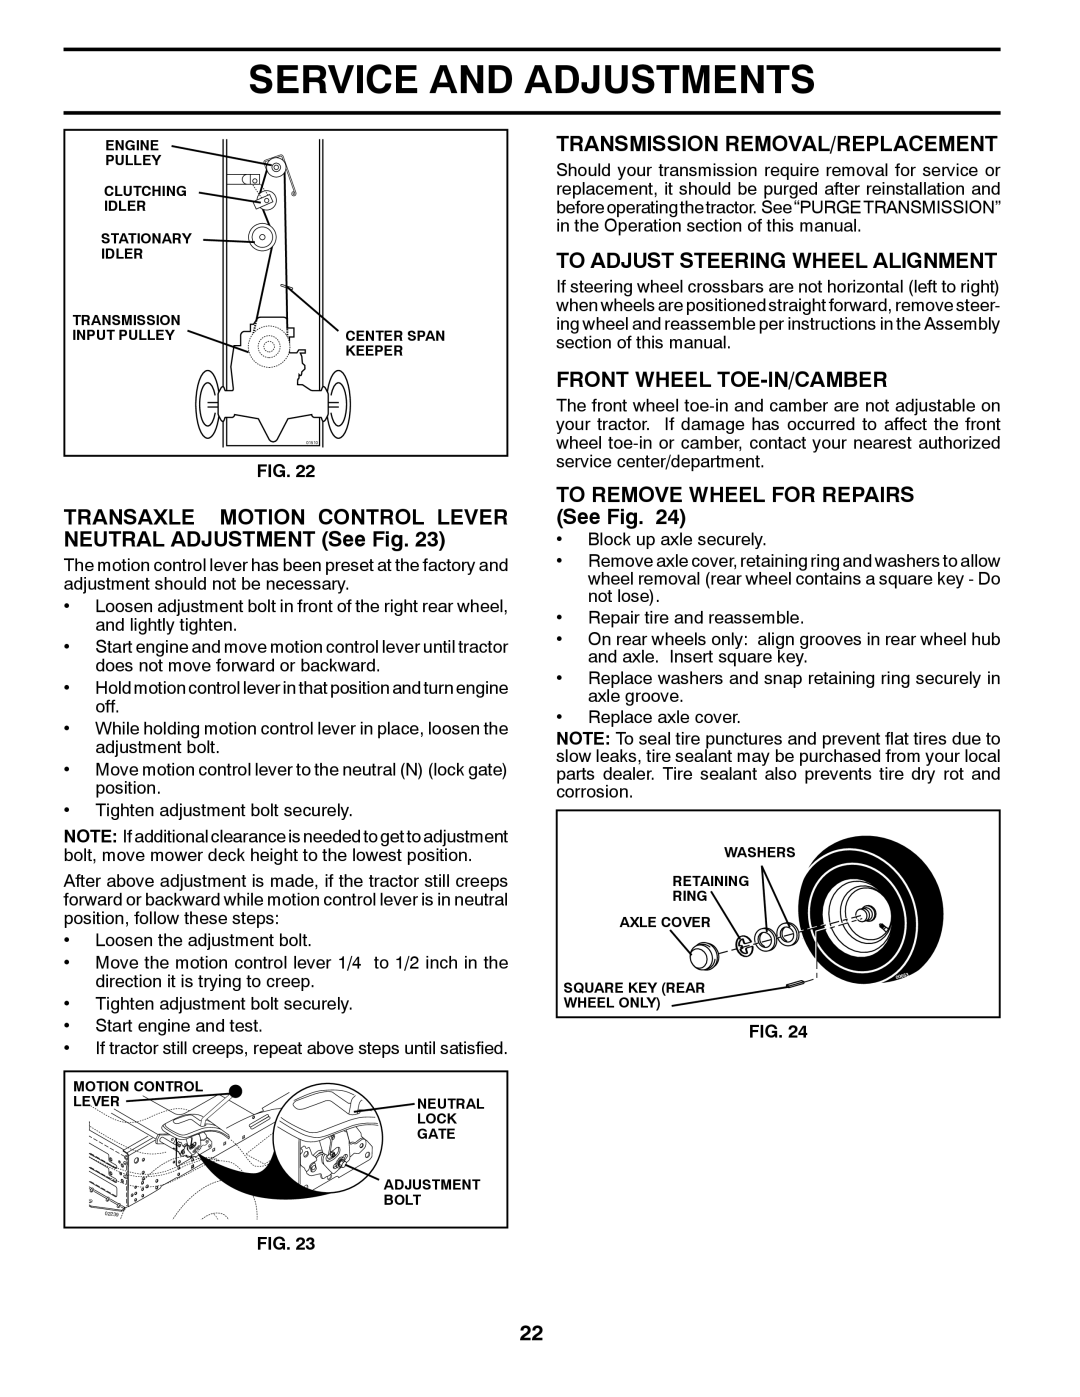 Husqvarna LTH1797 owner manual TRANSAXLE MOTION CONTROL LEVER NEUTRAL ADJUSTMENT See Fig, Transmission Removal/Replacement 